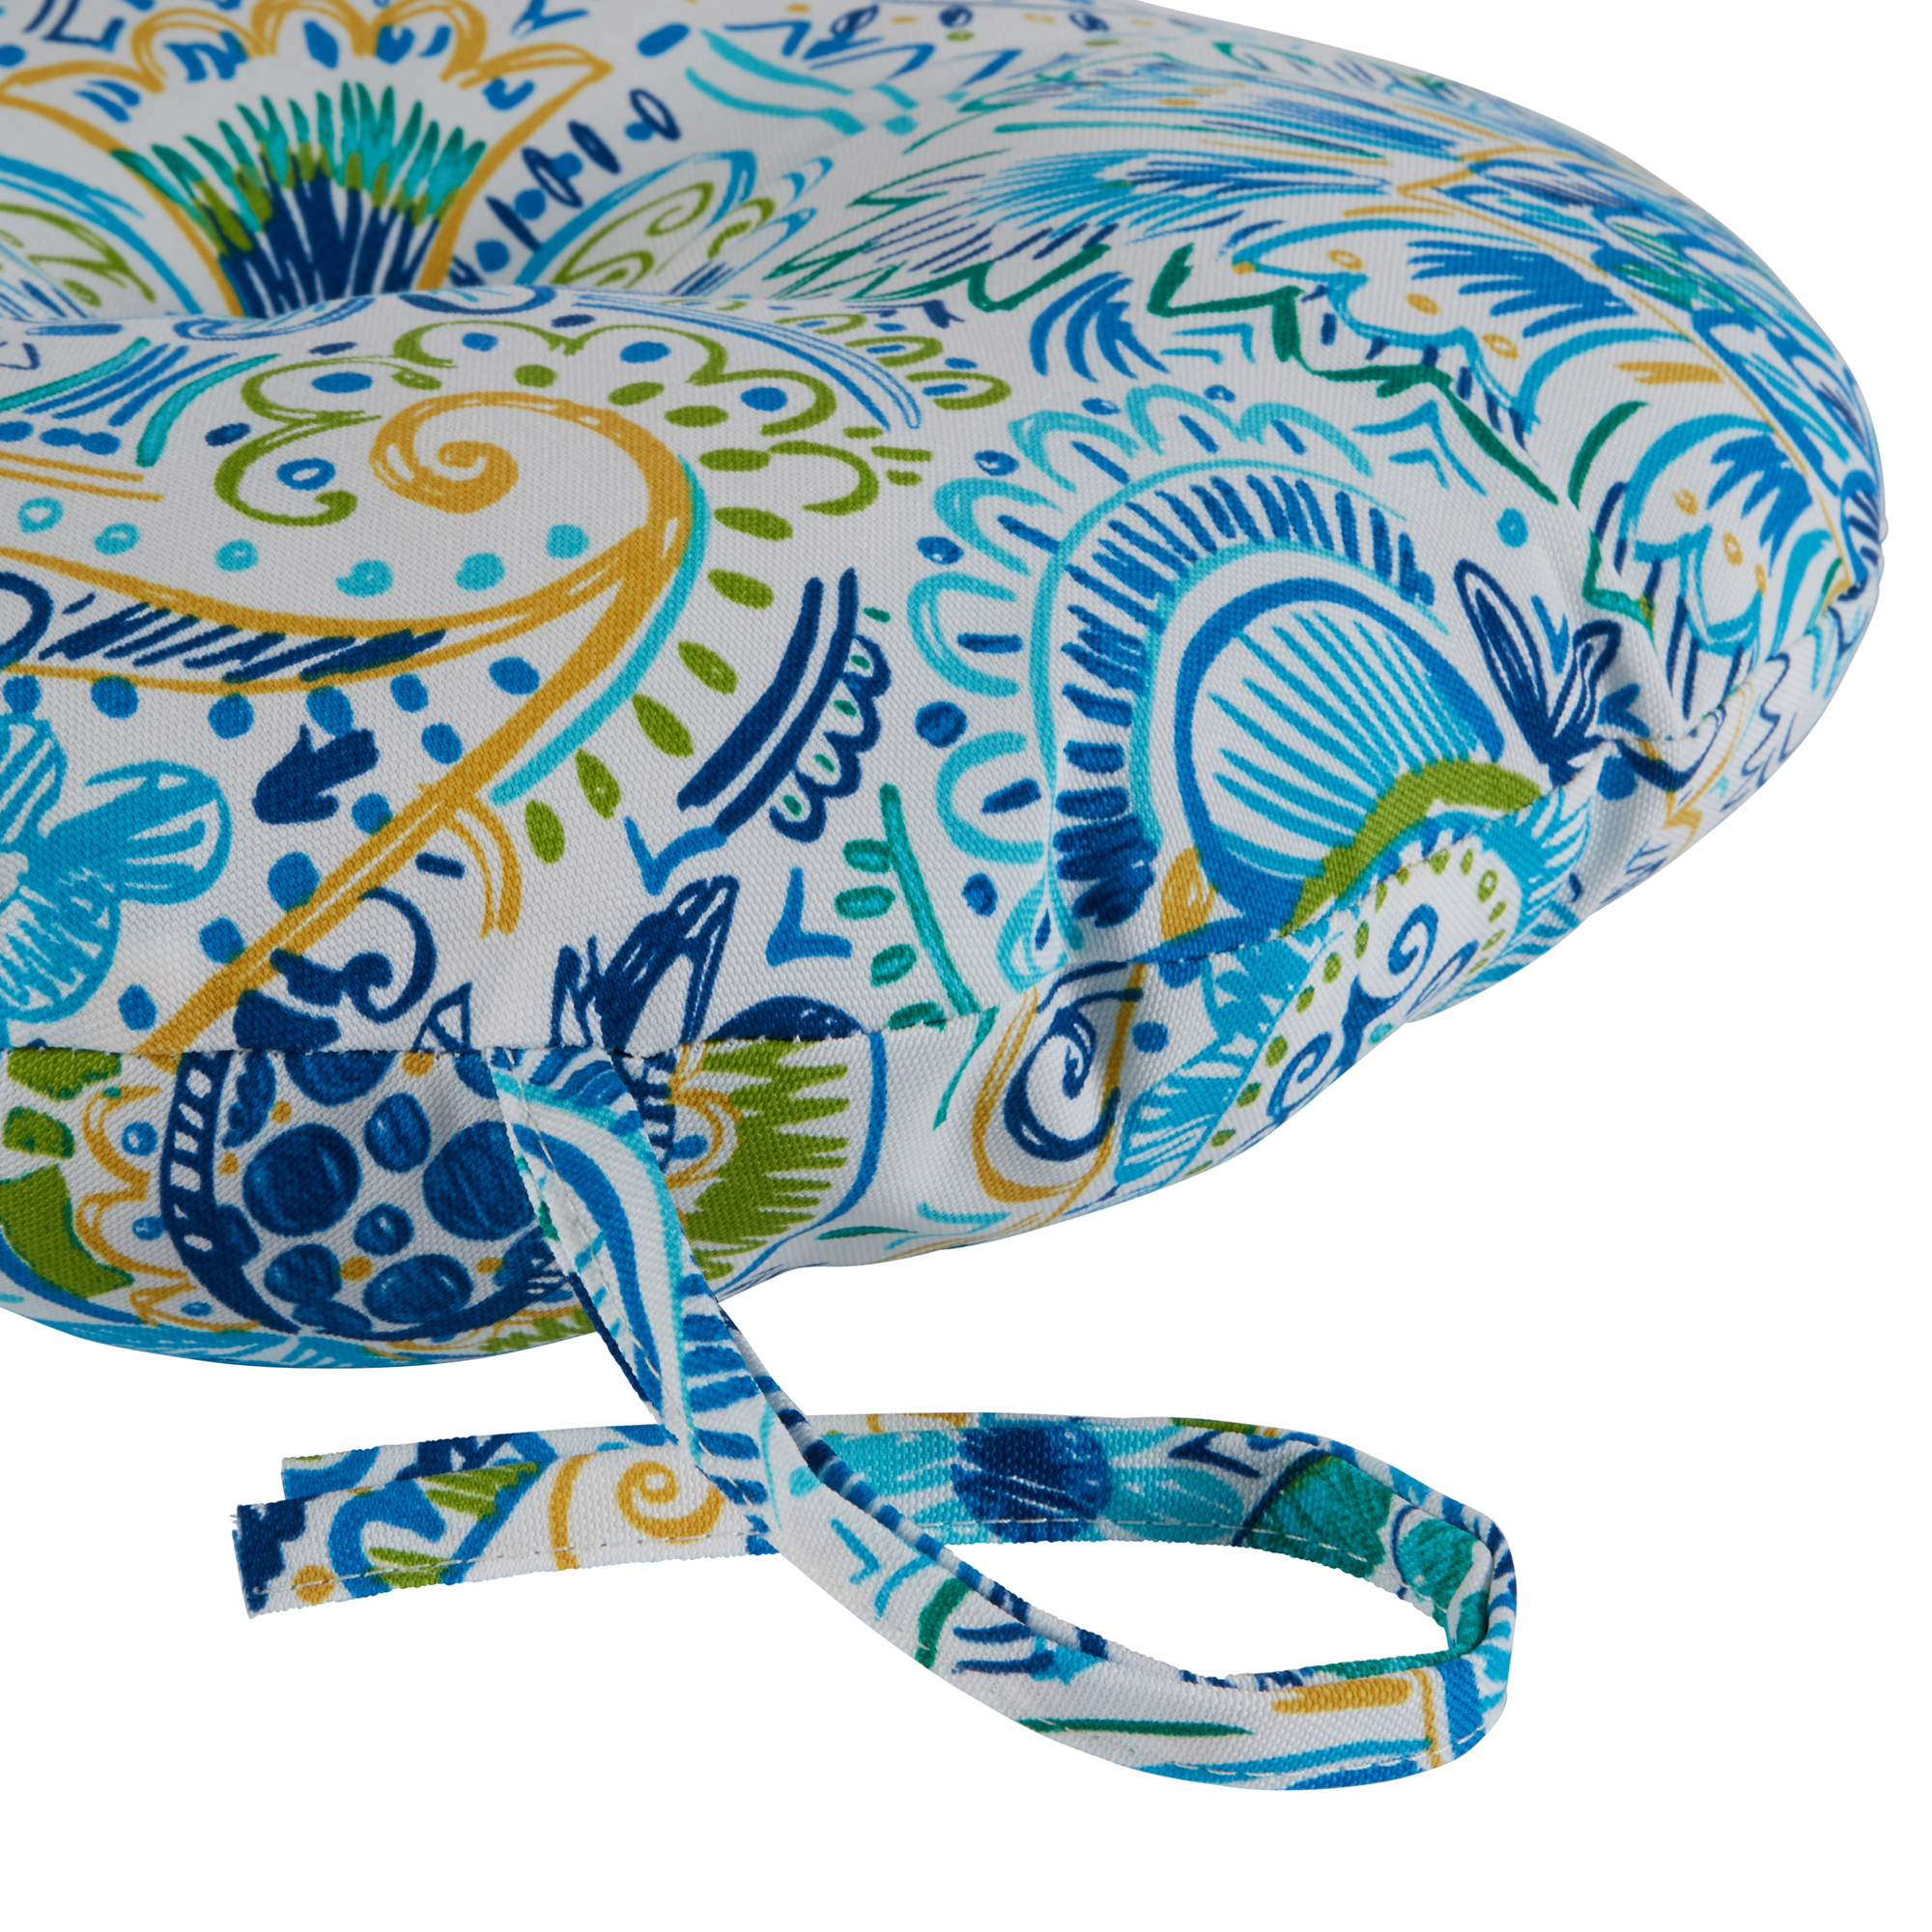 Greendale Home Fashions Baltic Paisley 15 in. Round Outdoor Reversible Bistro Seat Cushion (Set of 2) - image 3 of 6